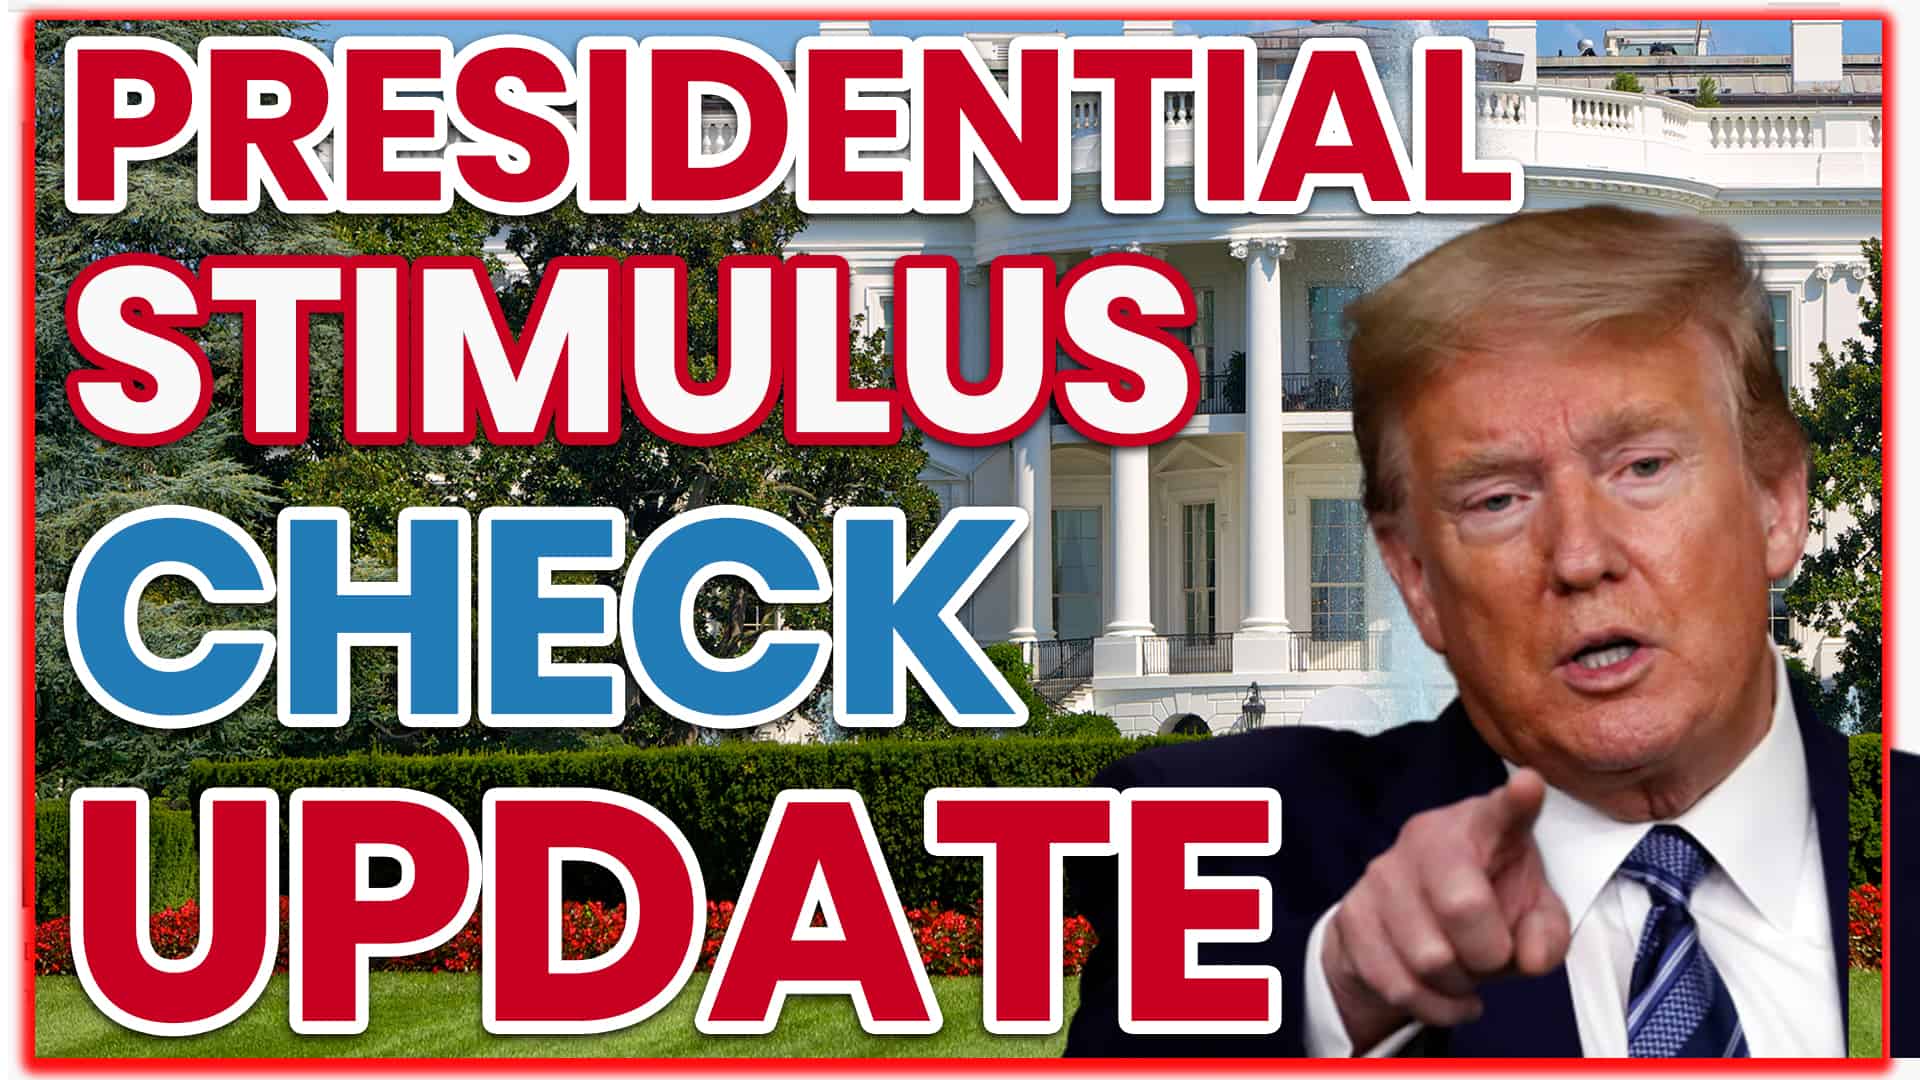 OFFICIALLY ANNOUNCED BY THE PRESIDENT THE SECOND STIMULUS CHECK IS COMING